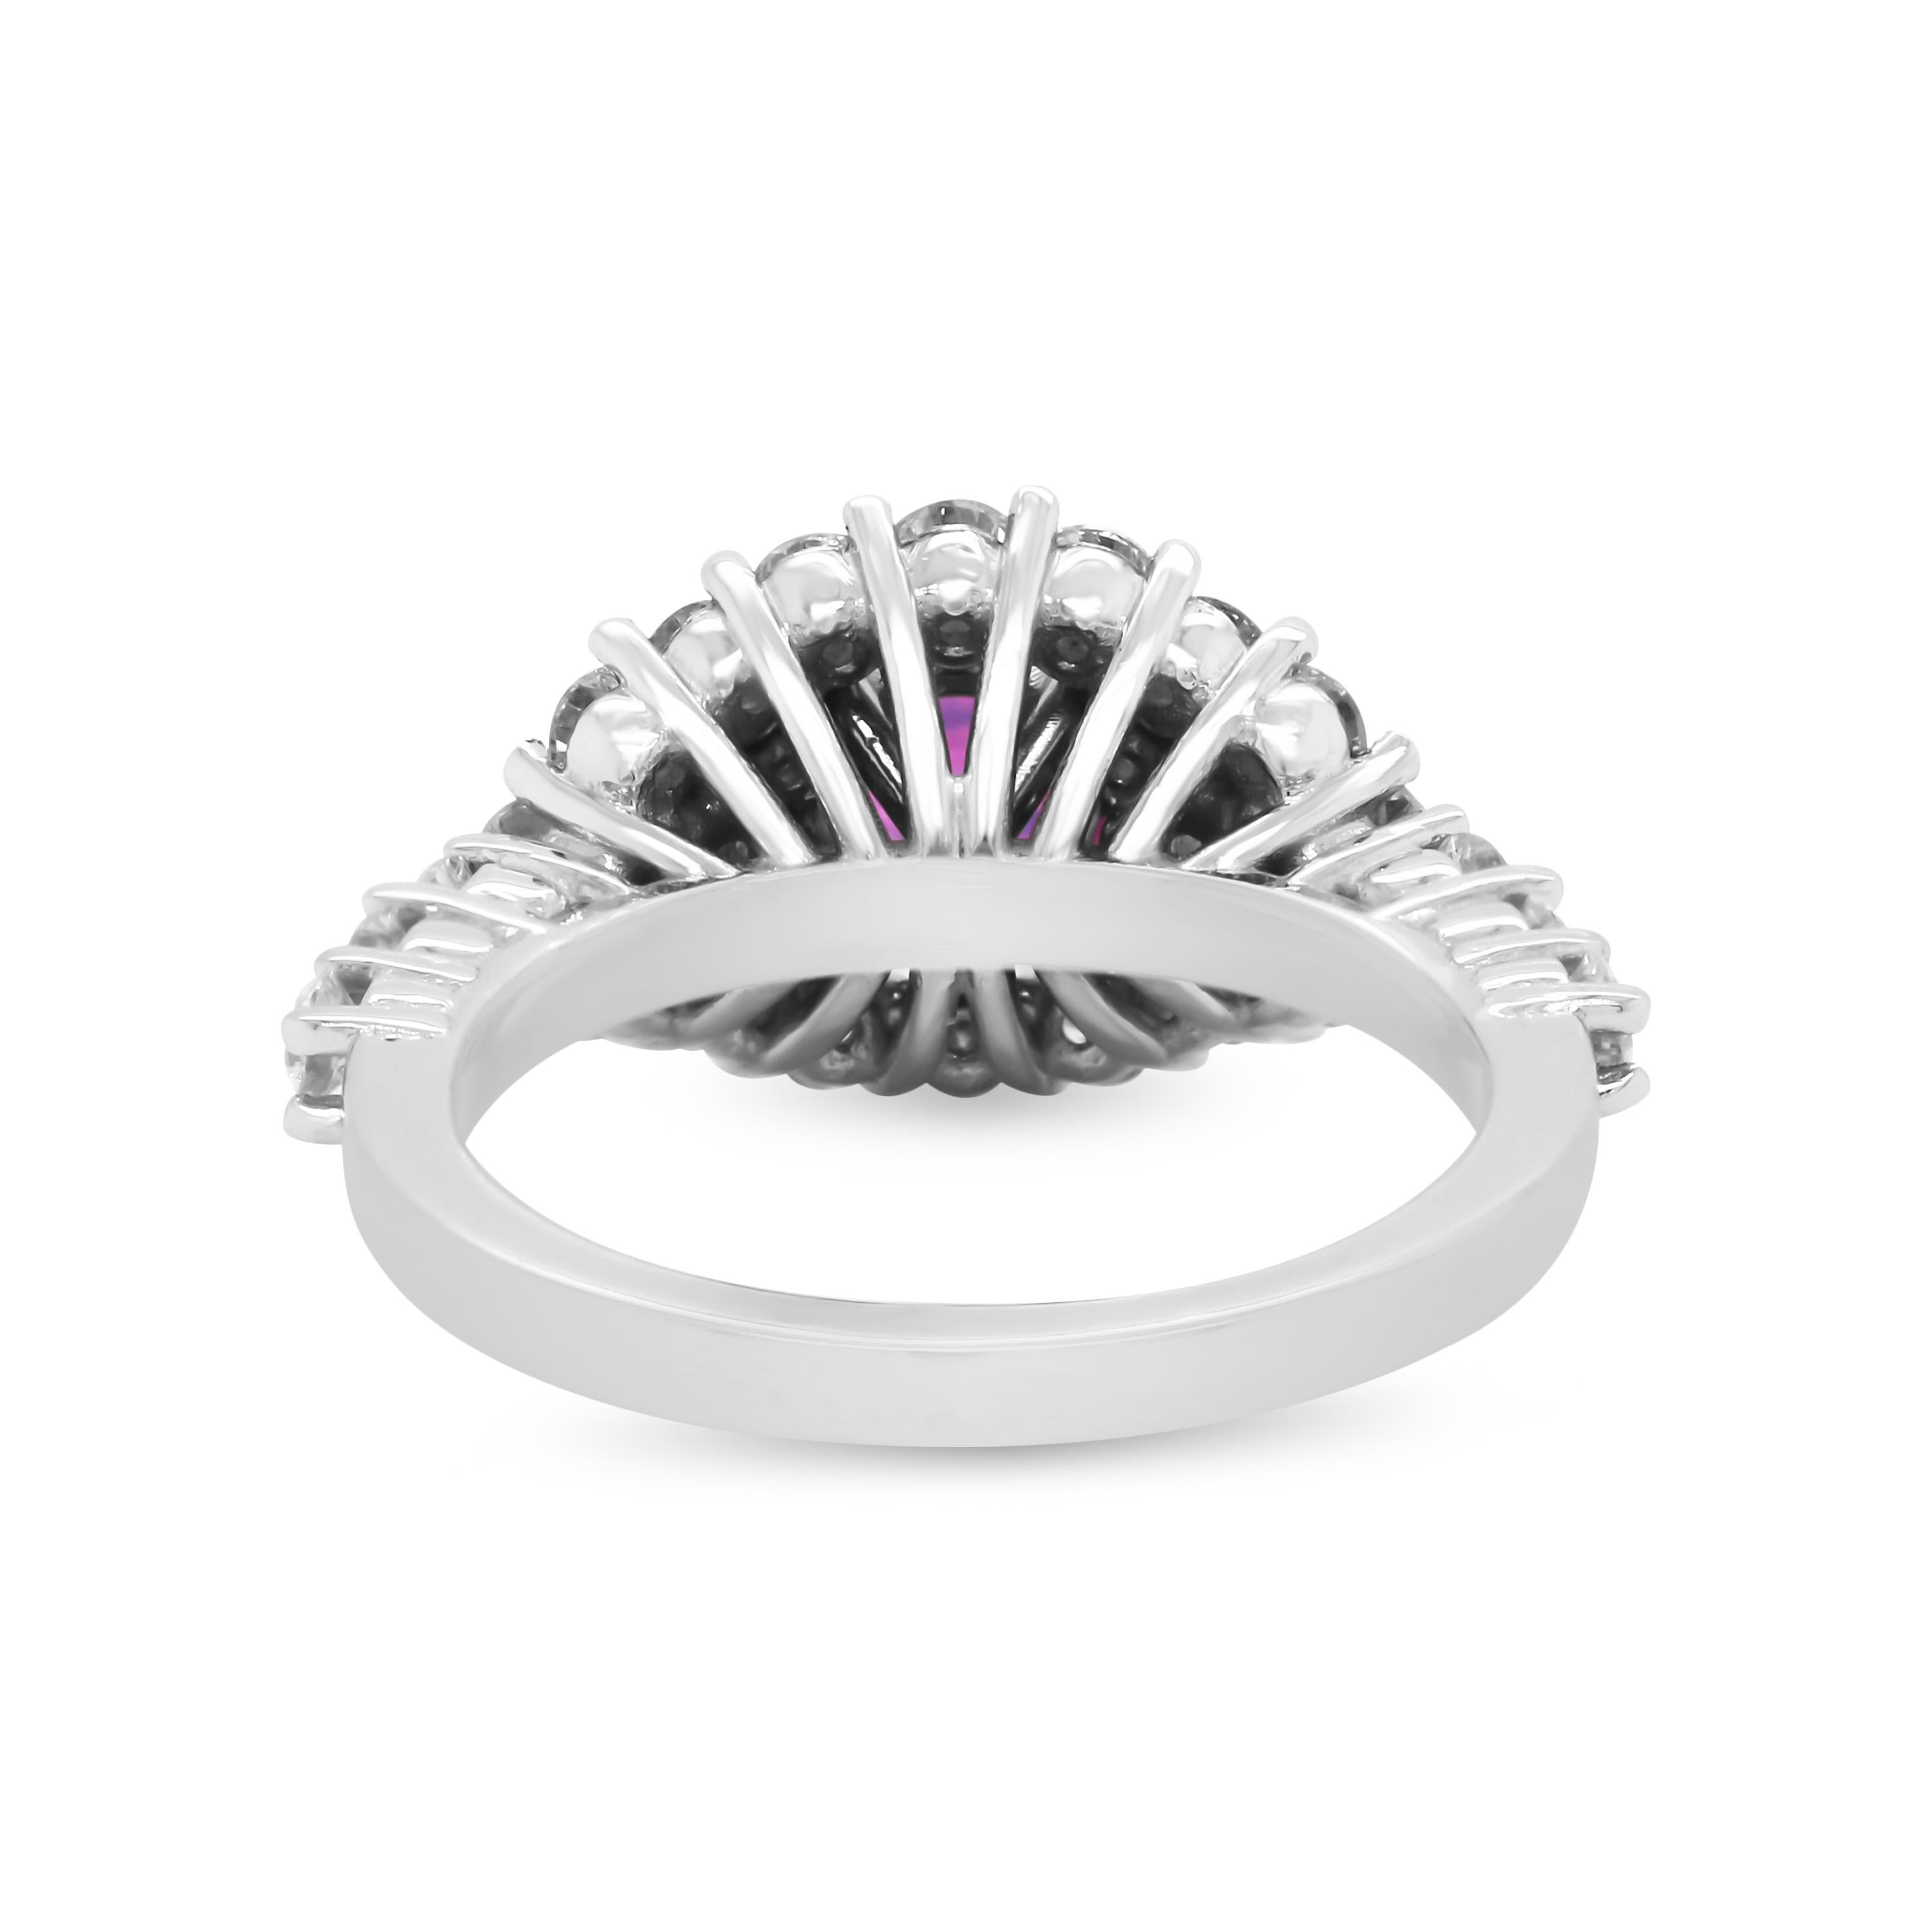 Contemporary 2.02 Carat Oval Bubble Gum Pink Sapphire 14k White Gold Diamond Cocktail Ring For Sale